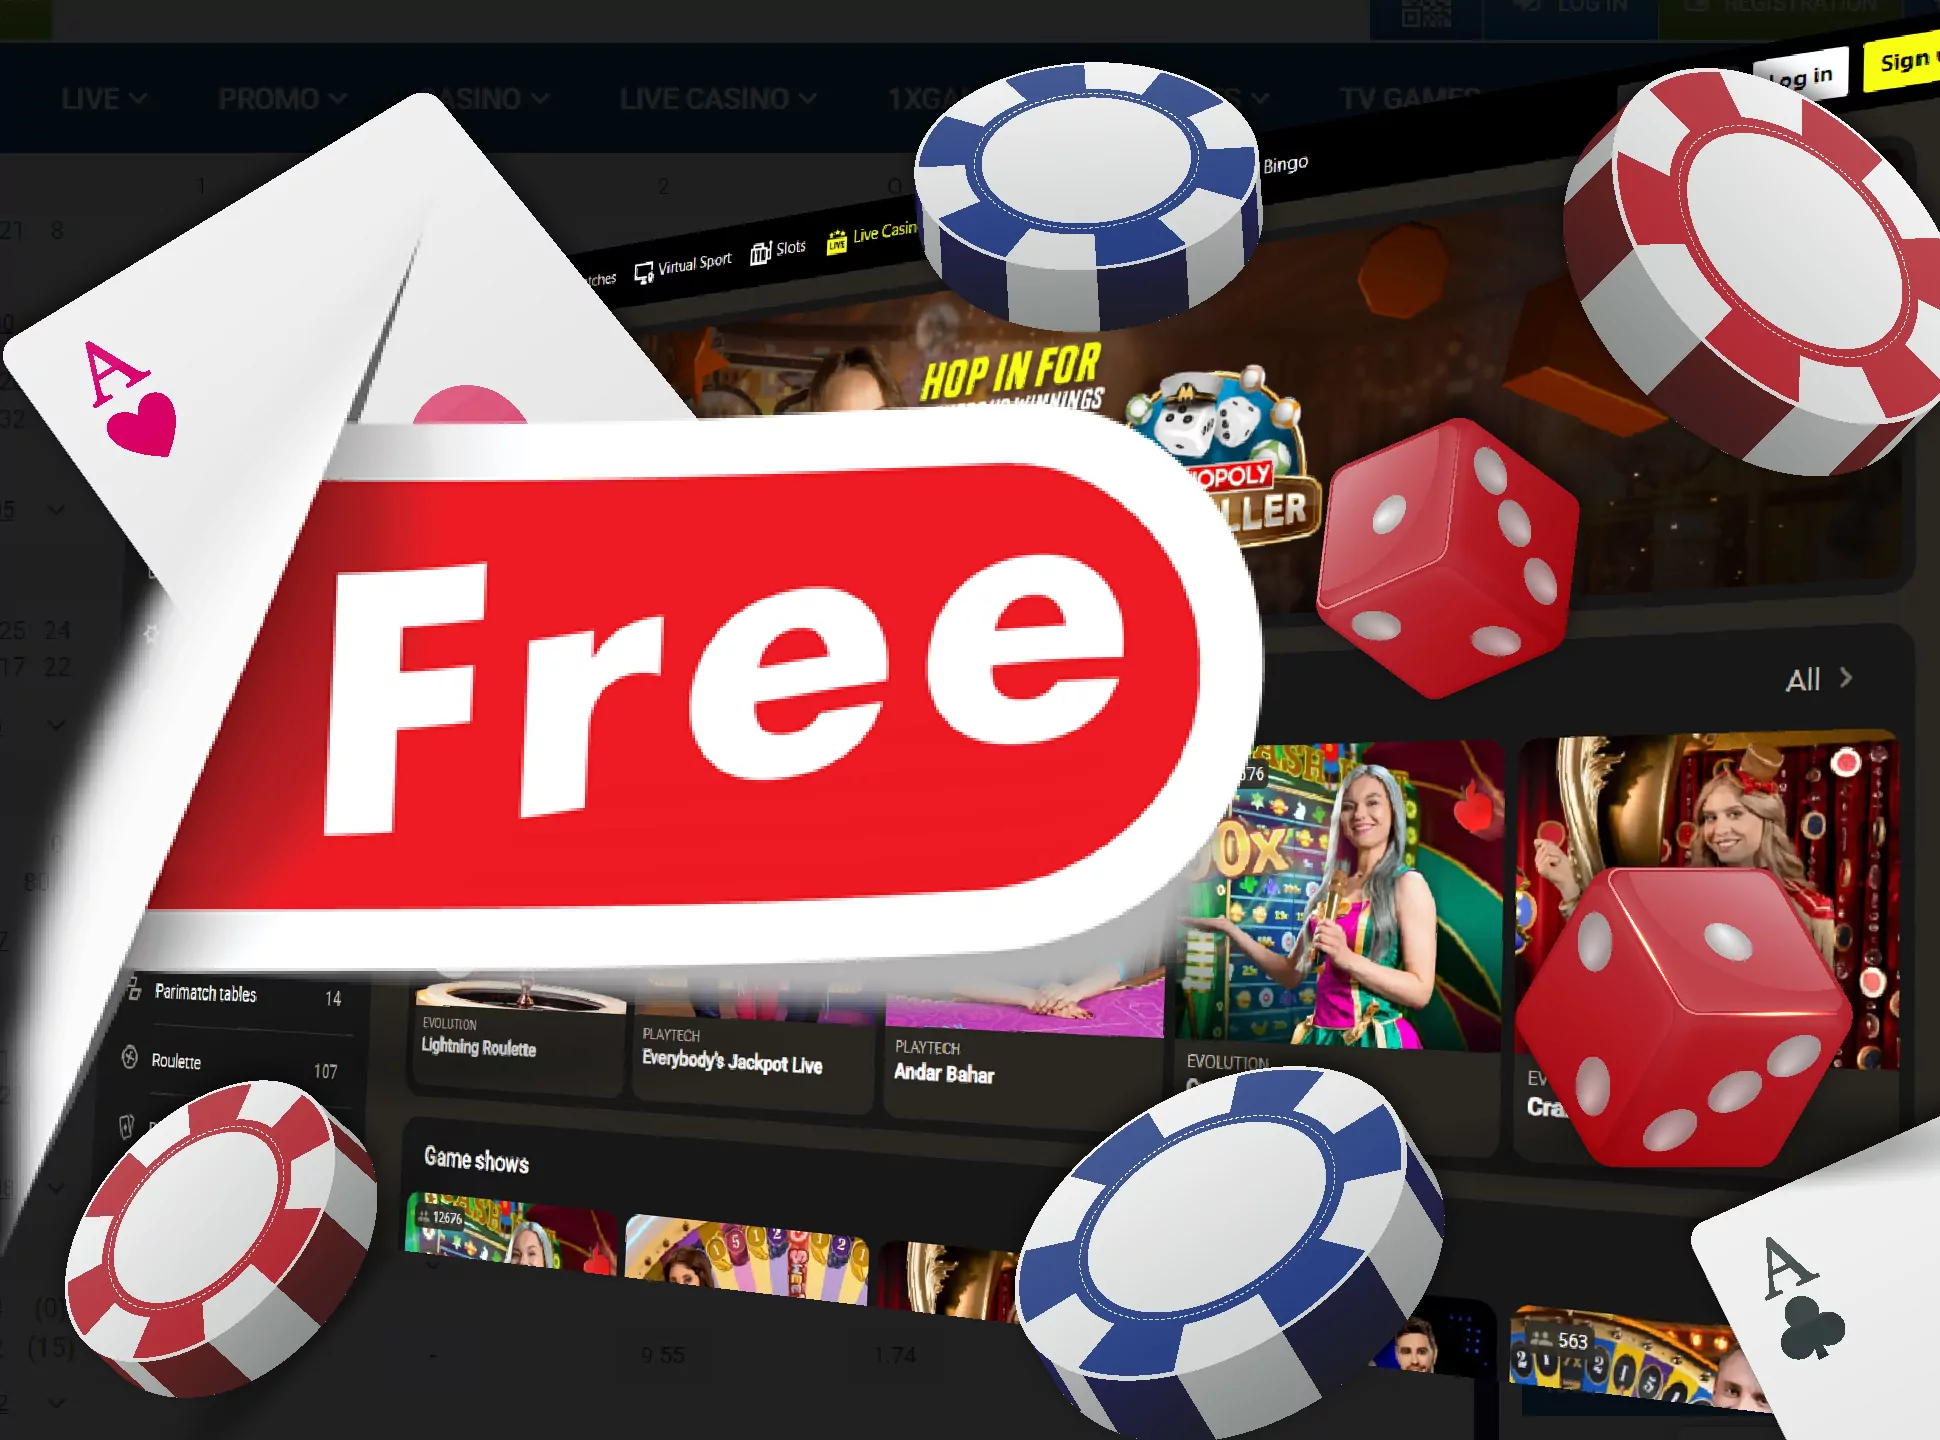 You can play free casino games to give a try to a new casino.